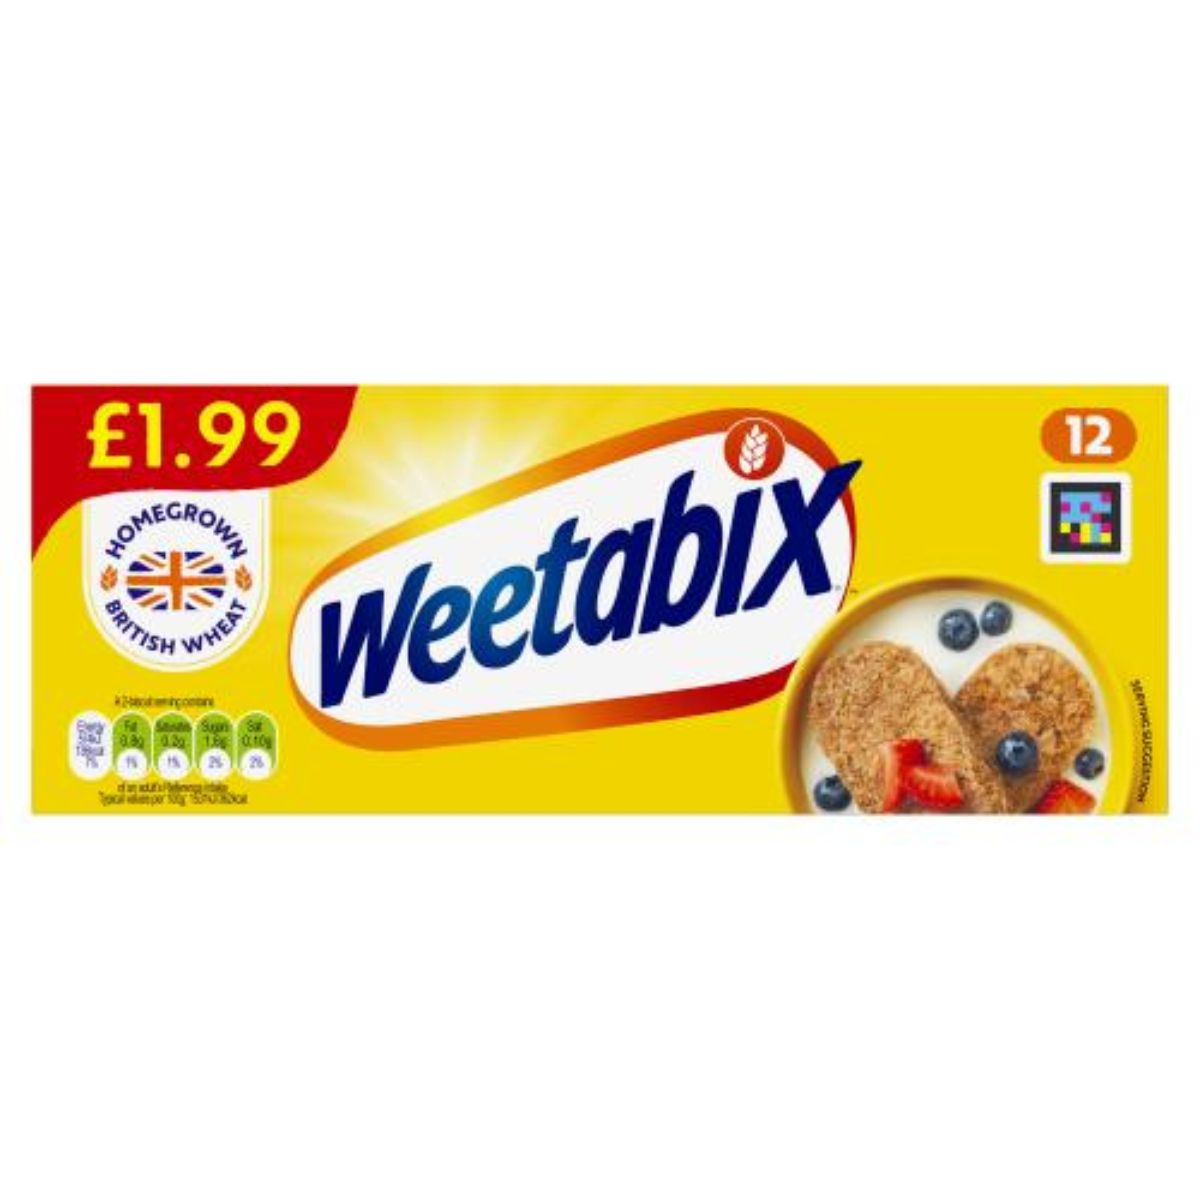 A box of Weetabix - Biscuits - 12pcs breakfast cereal.